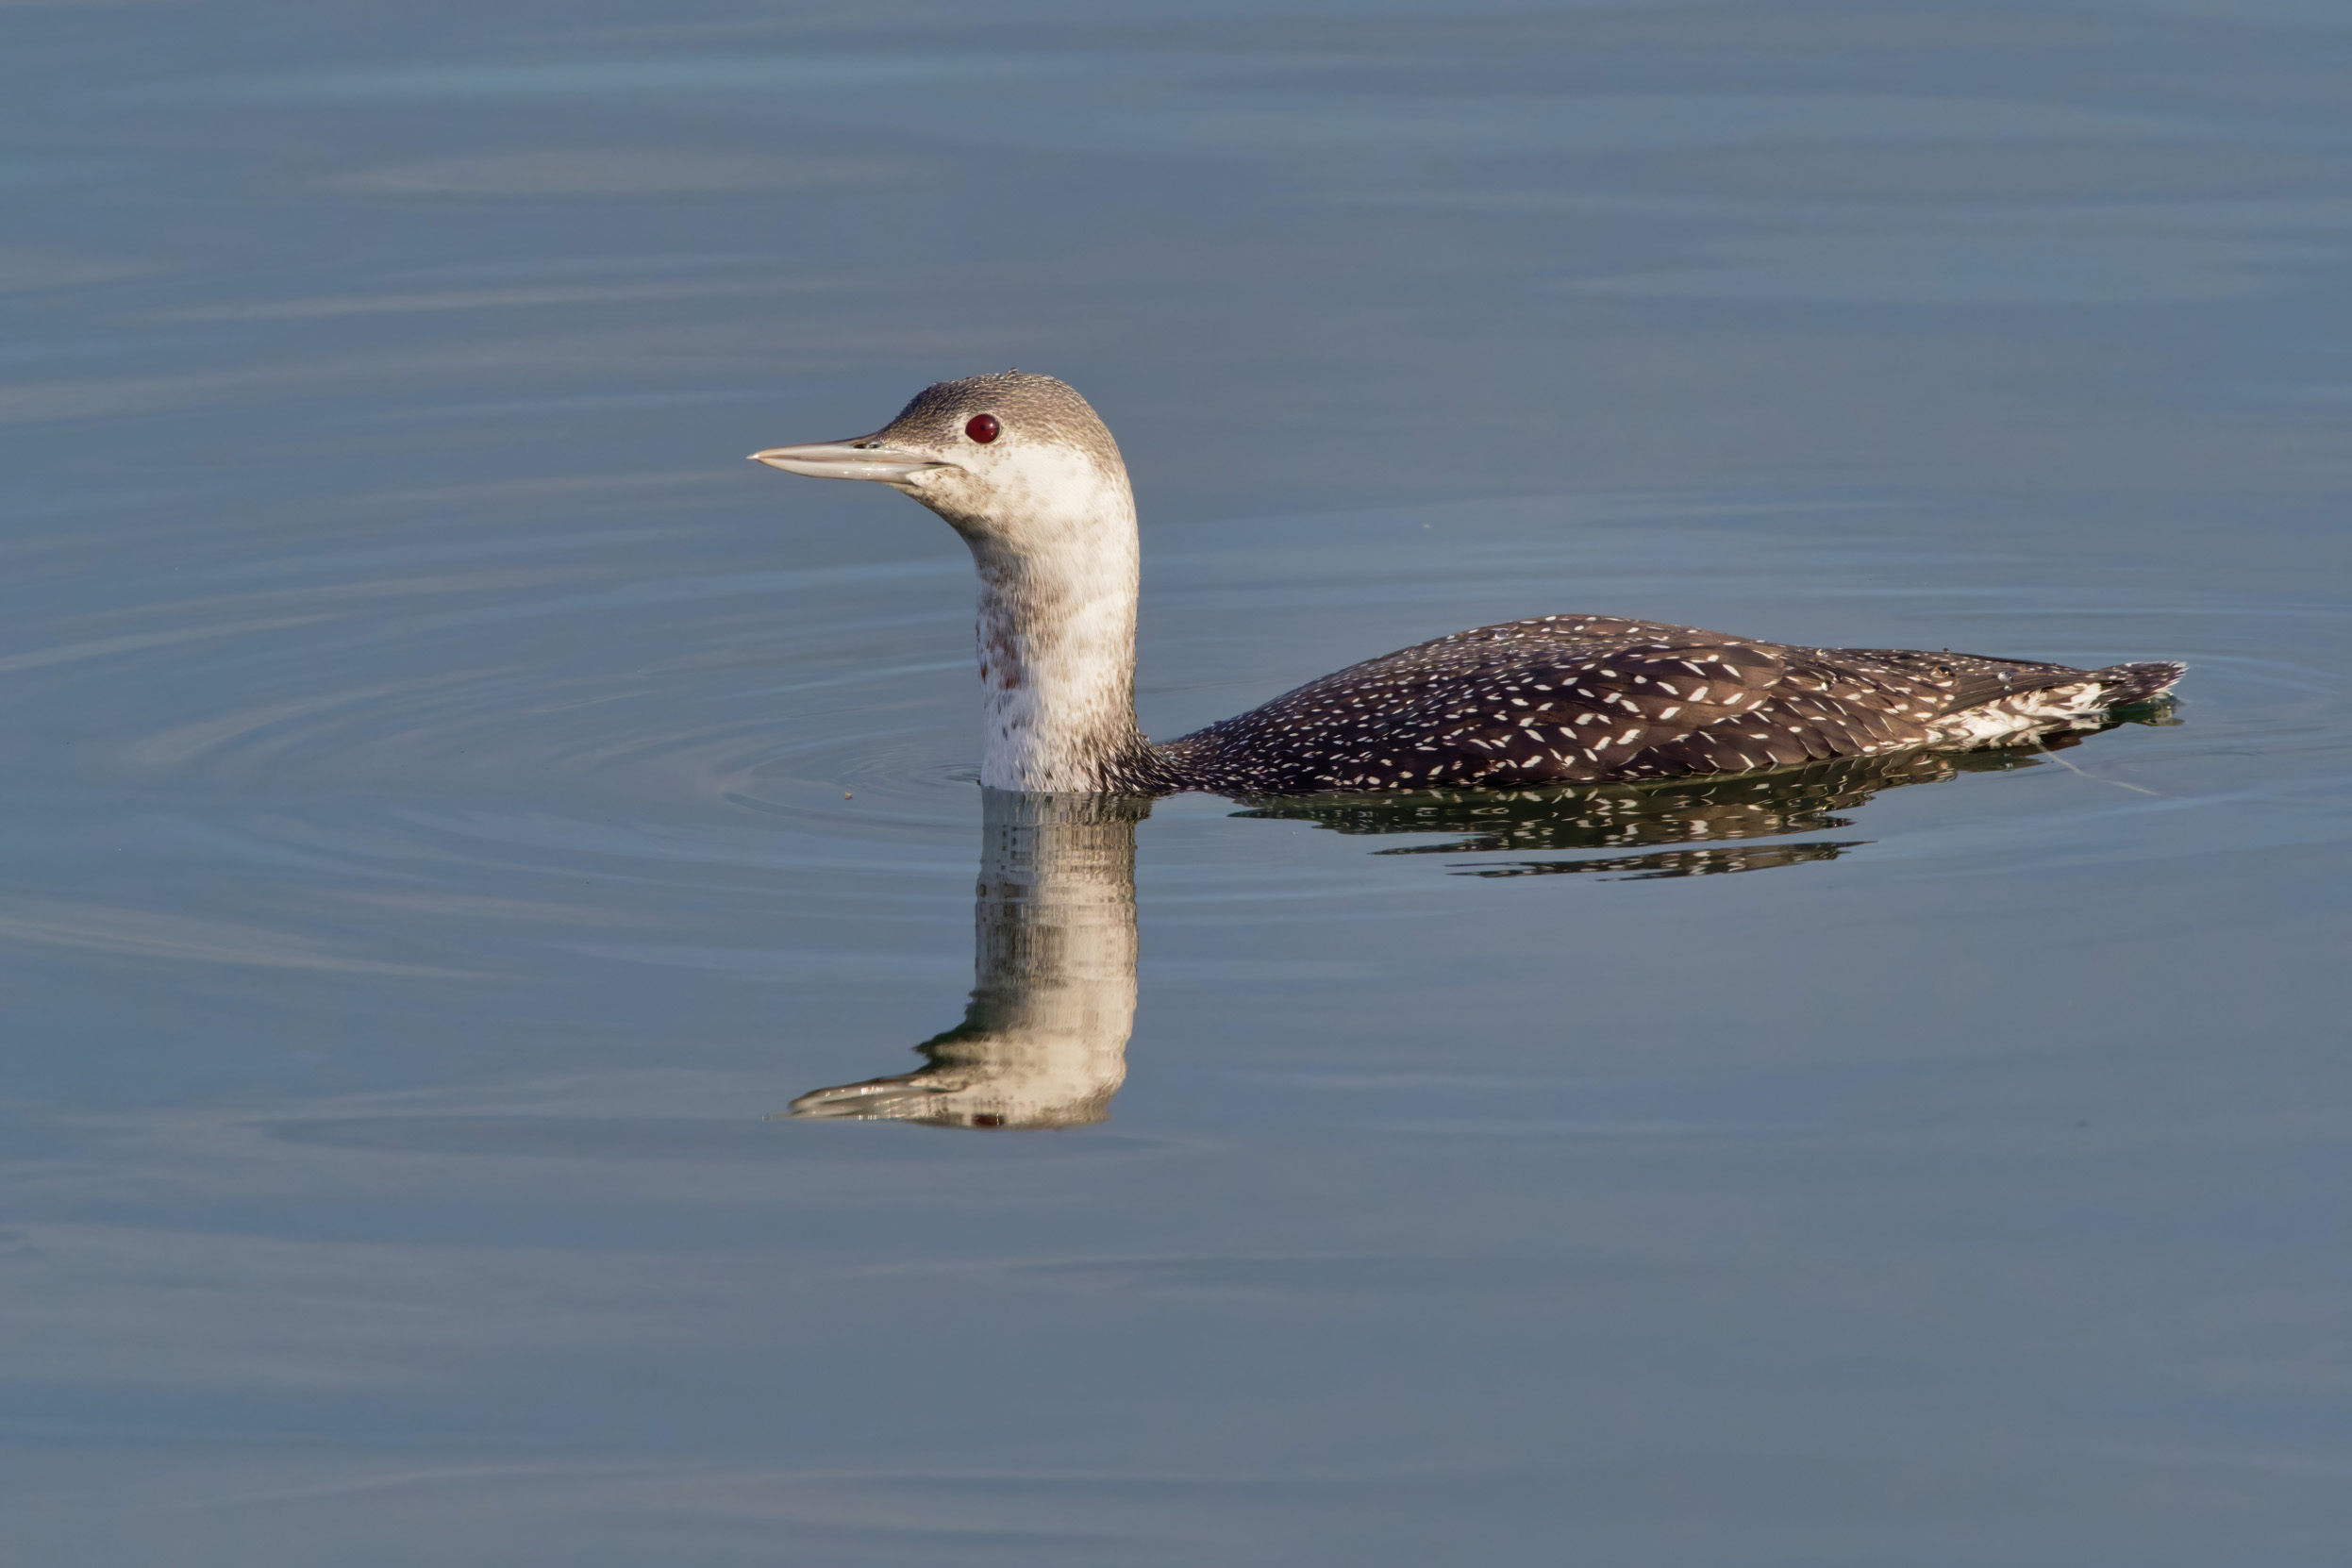 Red-throated Diver in winter plumage swimming on a body of water.